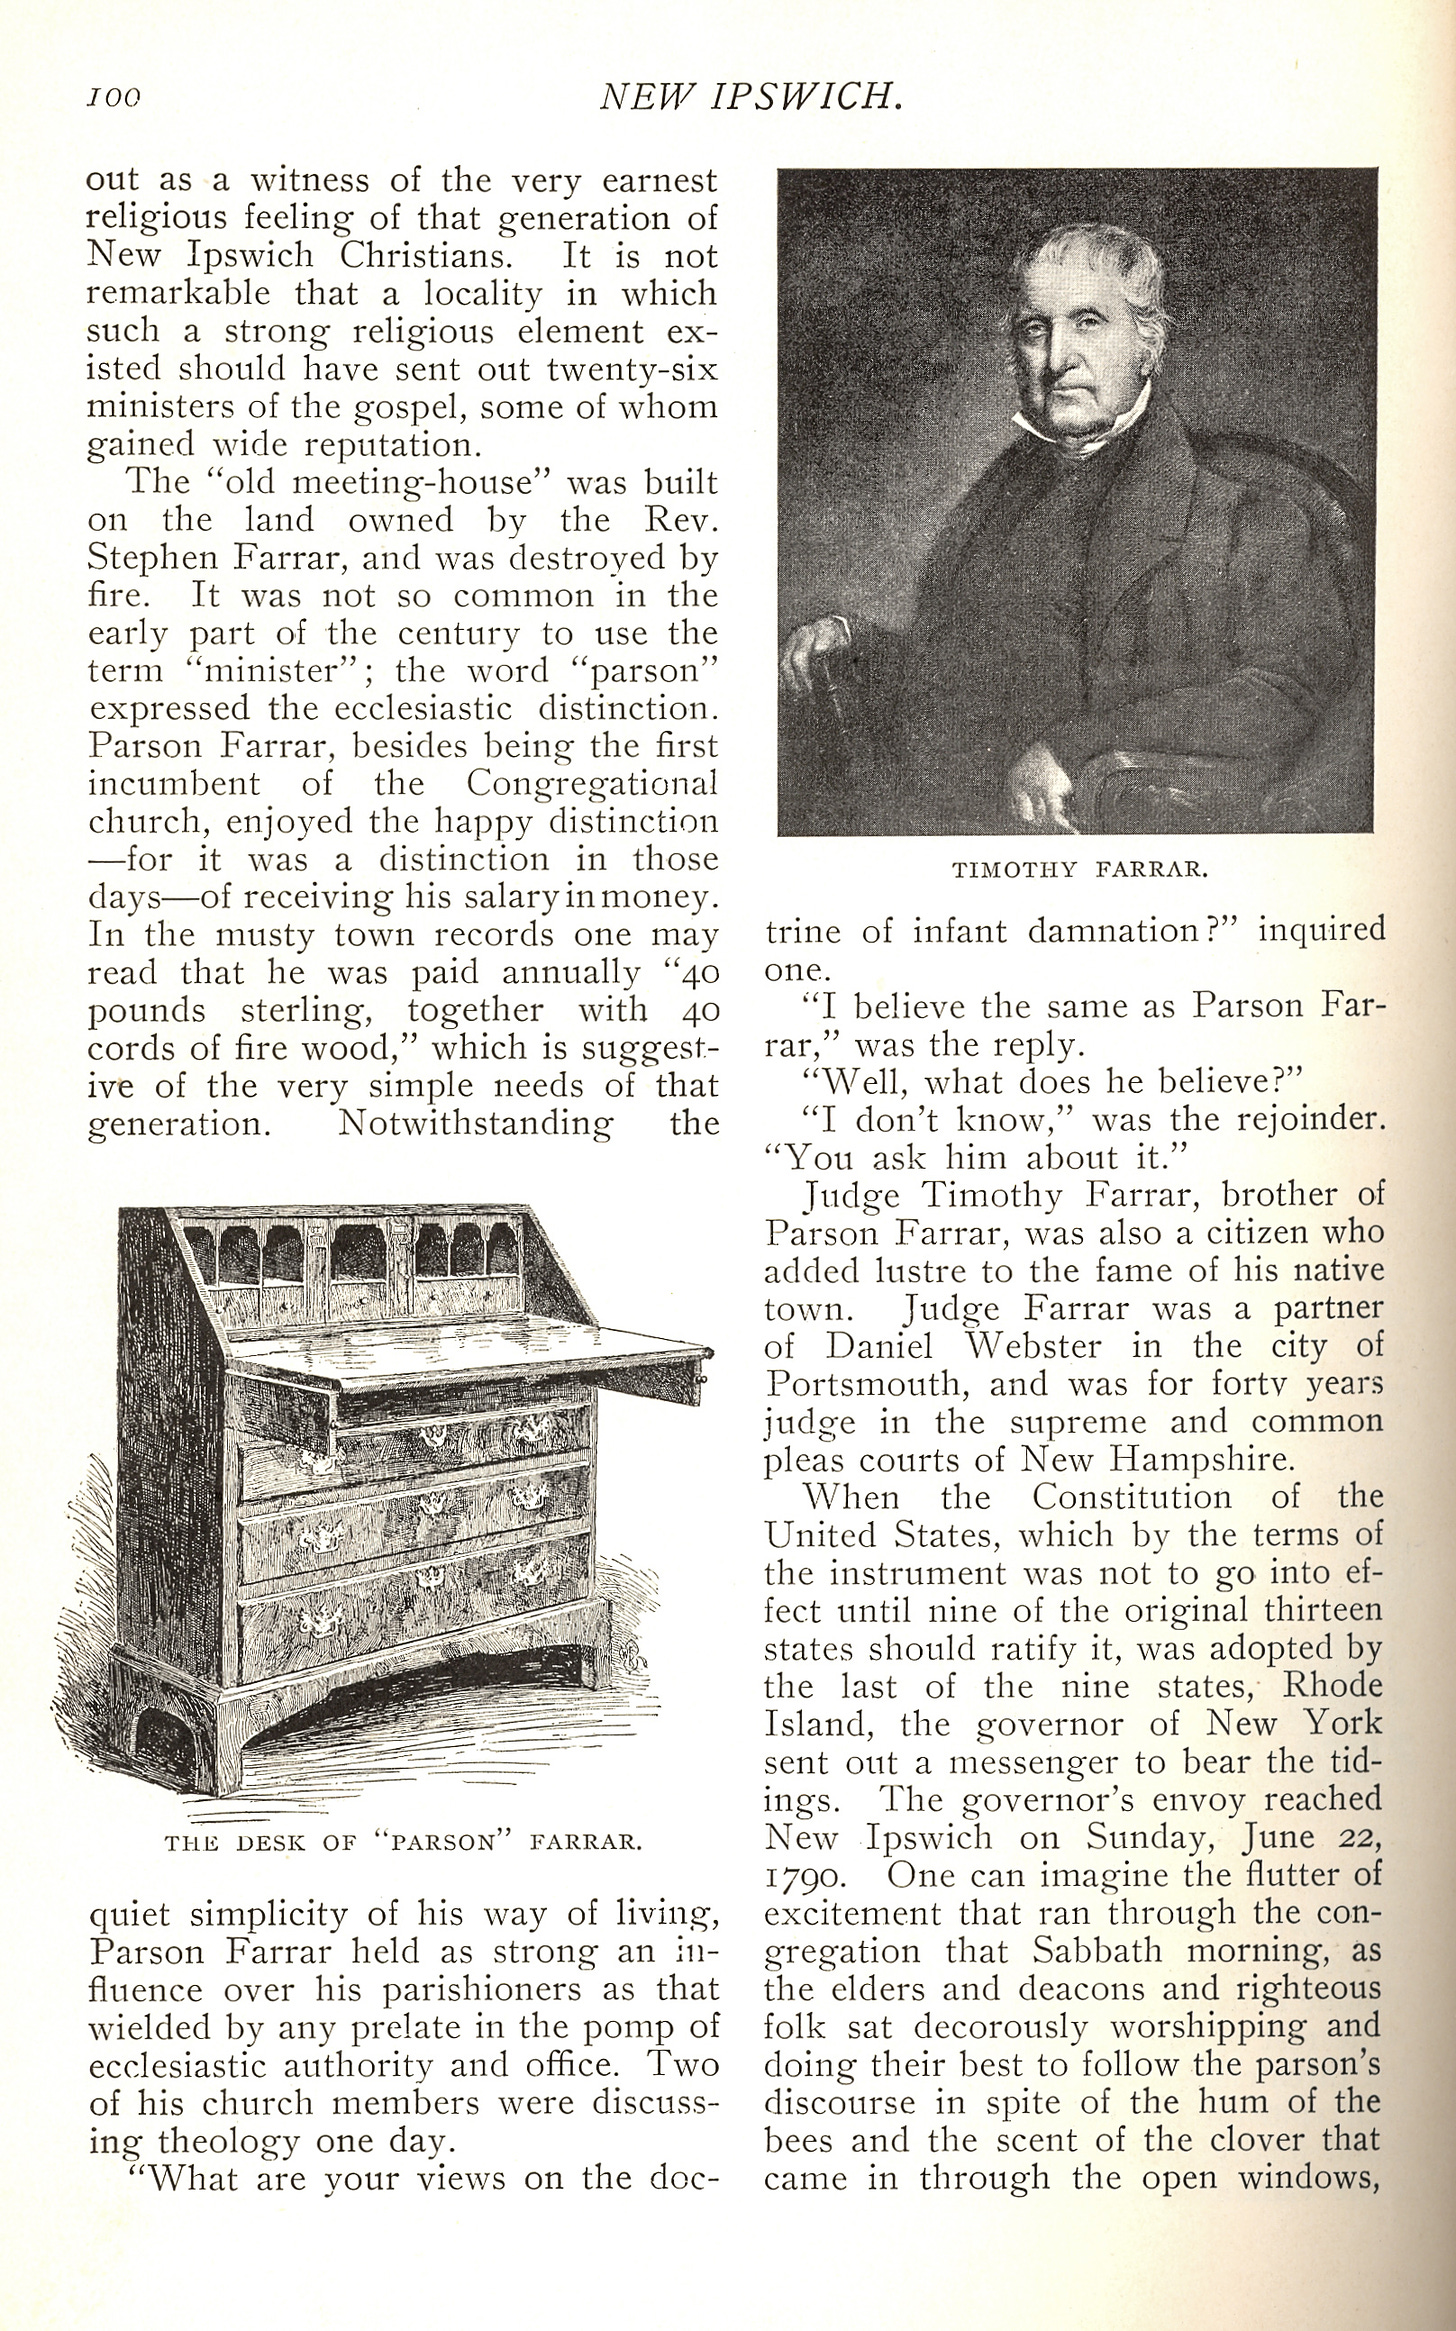 New England Magazine, March 1900, page 100